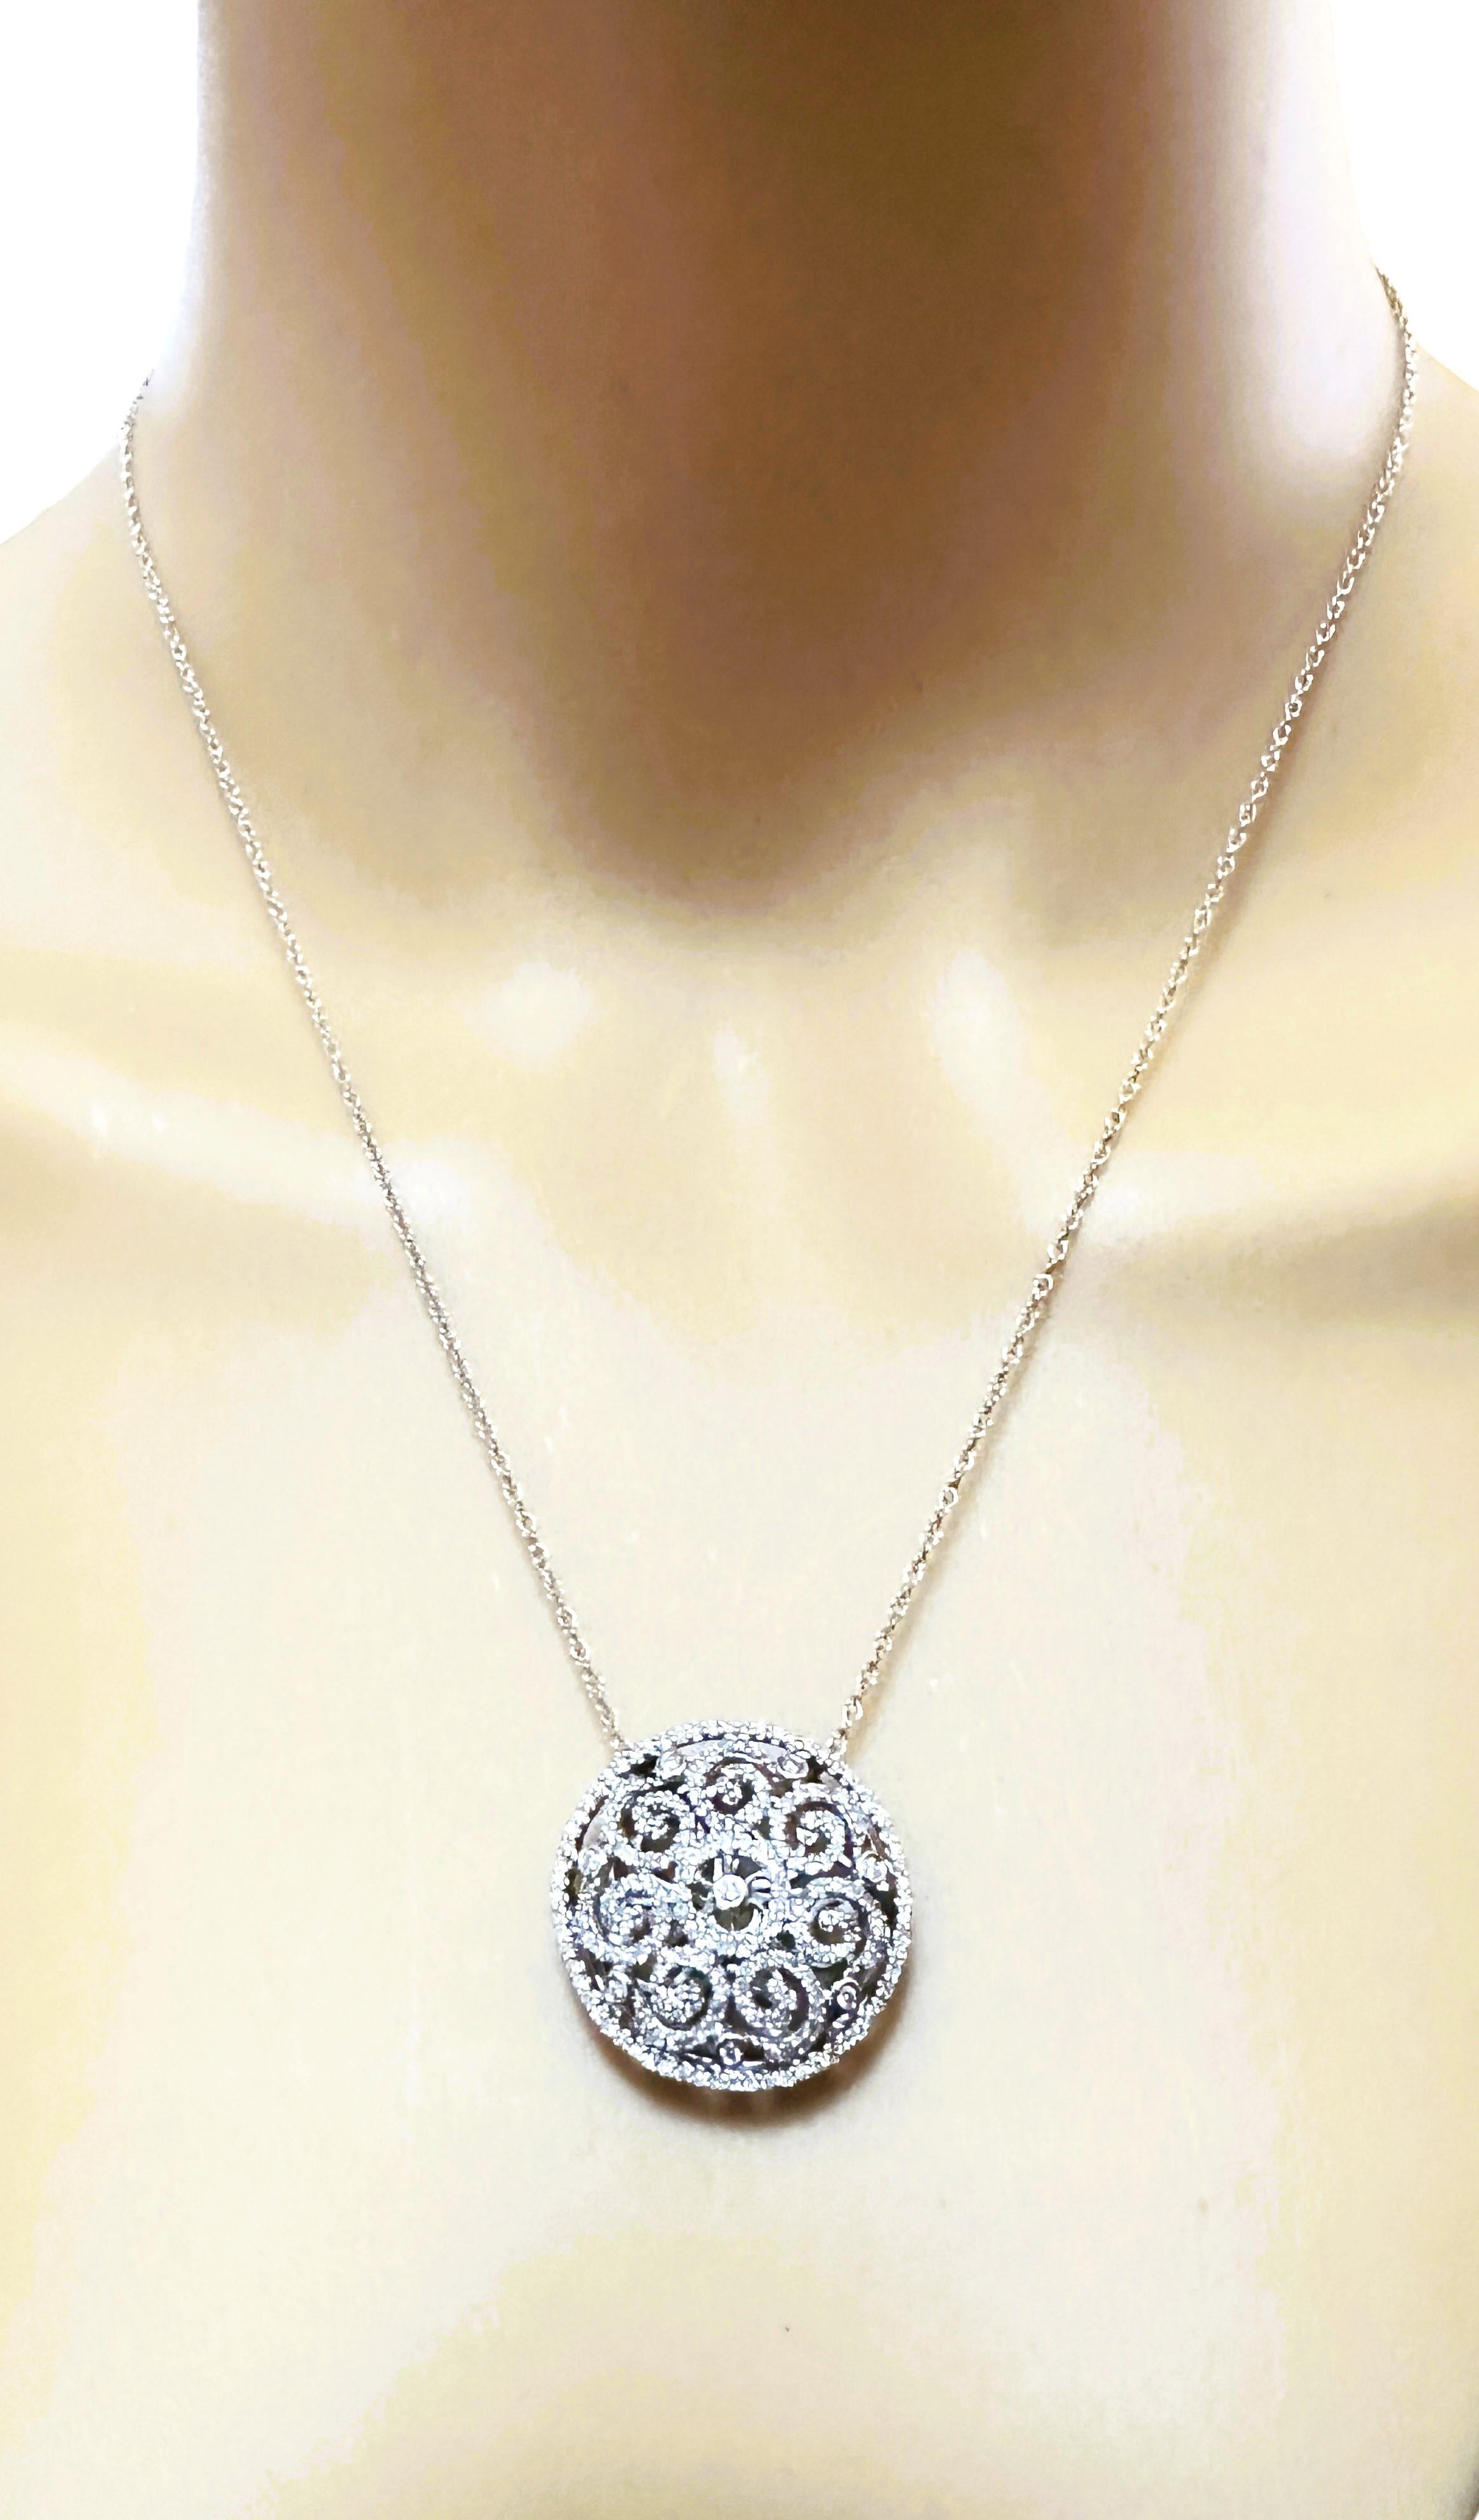 Art Deco 14k White Gold 2 Carat Diamond Scroll Pendant Necklace with Appraisal For Sale